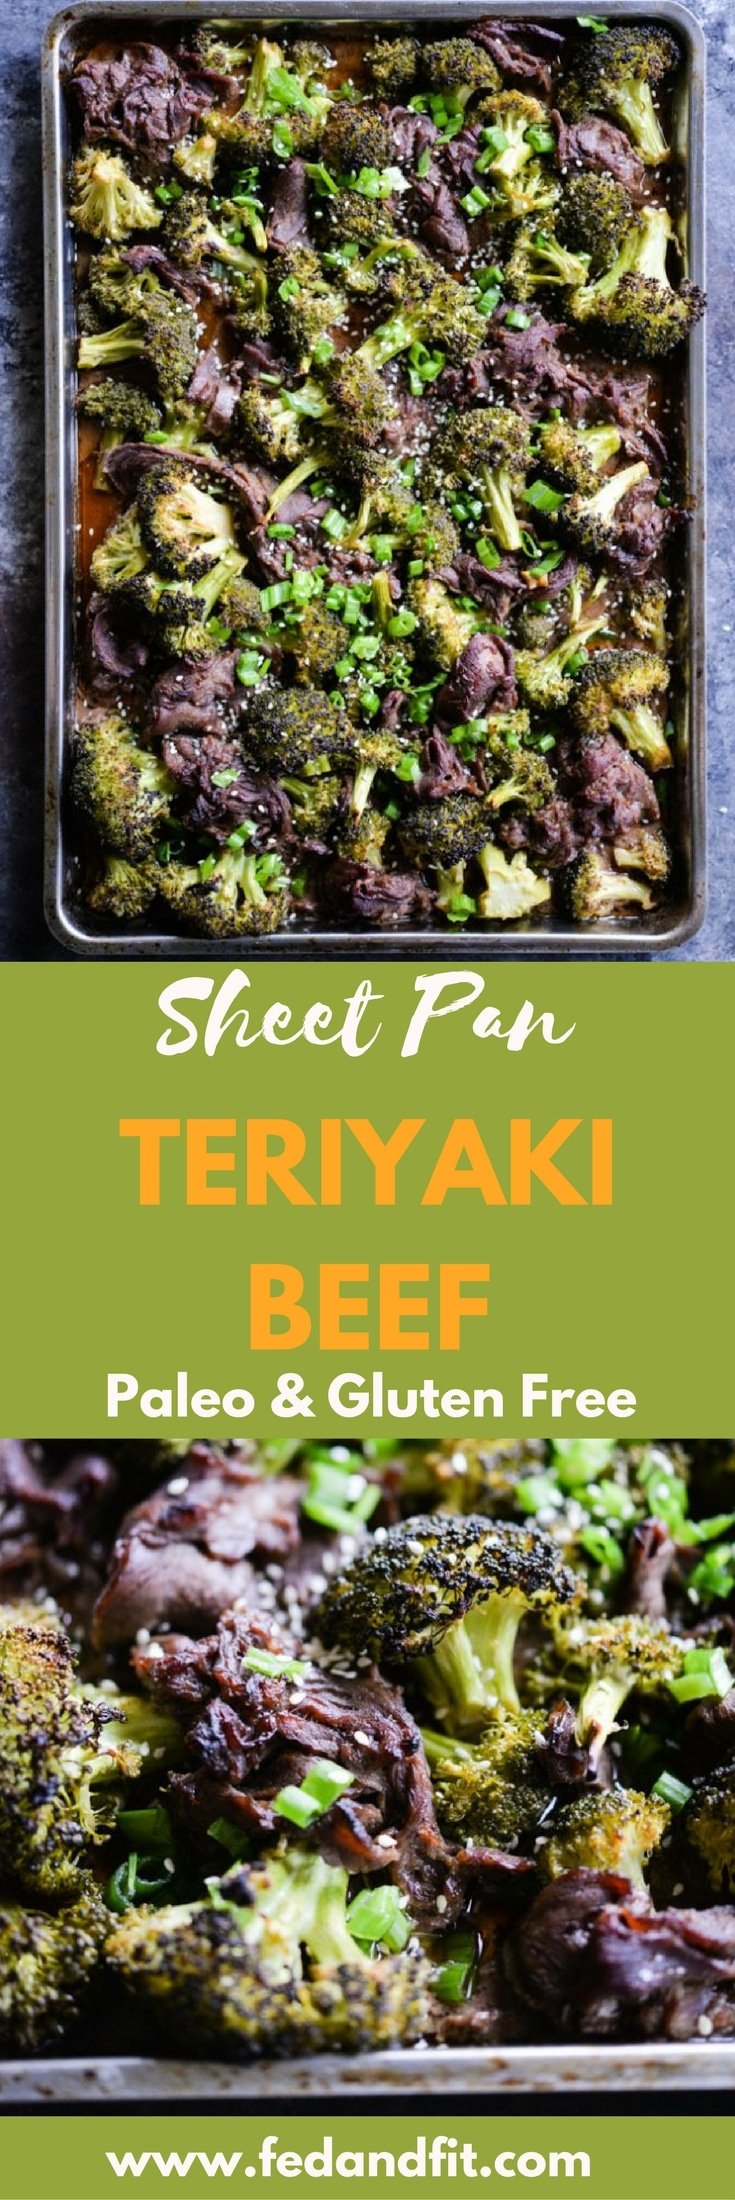 This Teriyaki beef sheet pan dinner combines thinly sliced beef & broccoli with a Paleo and gluten free marinade that bakes up in 30 minutes for an easy way to get an Asian-inspired meal on the table!